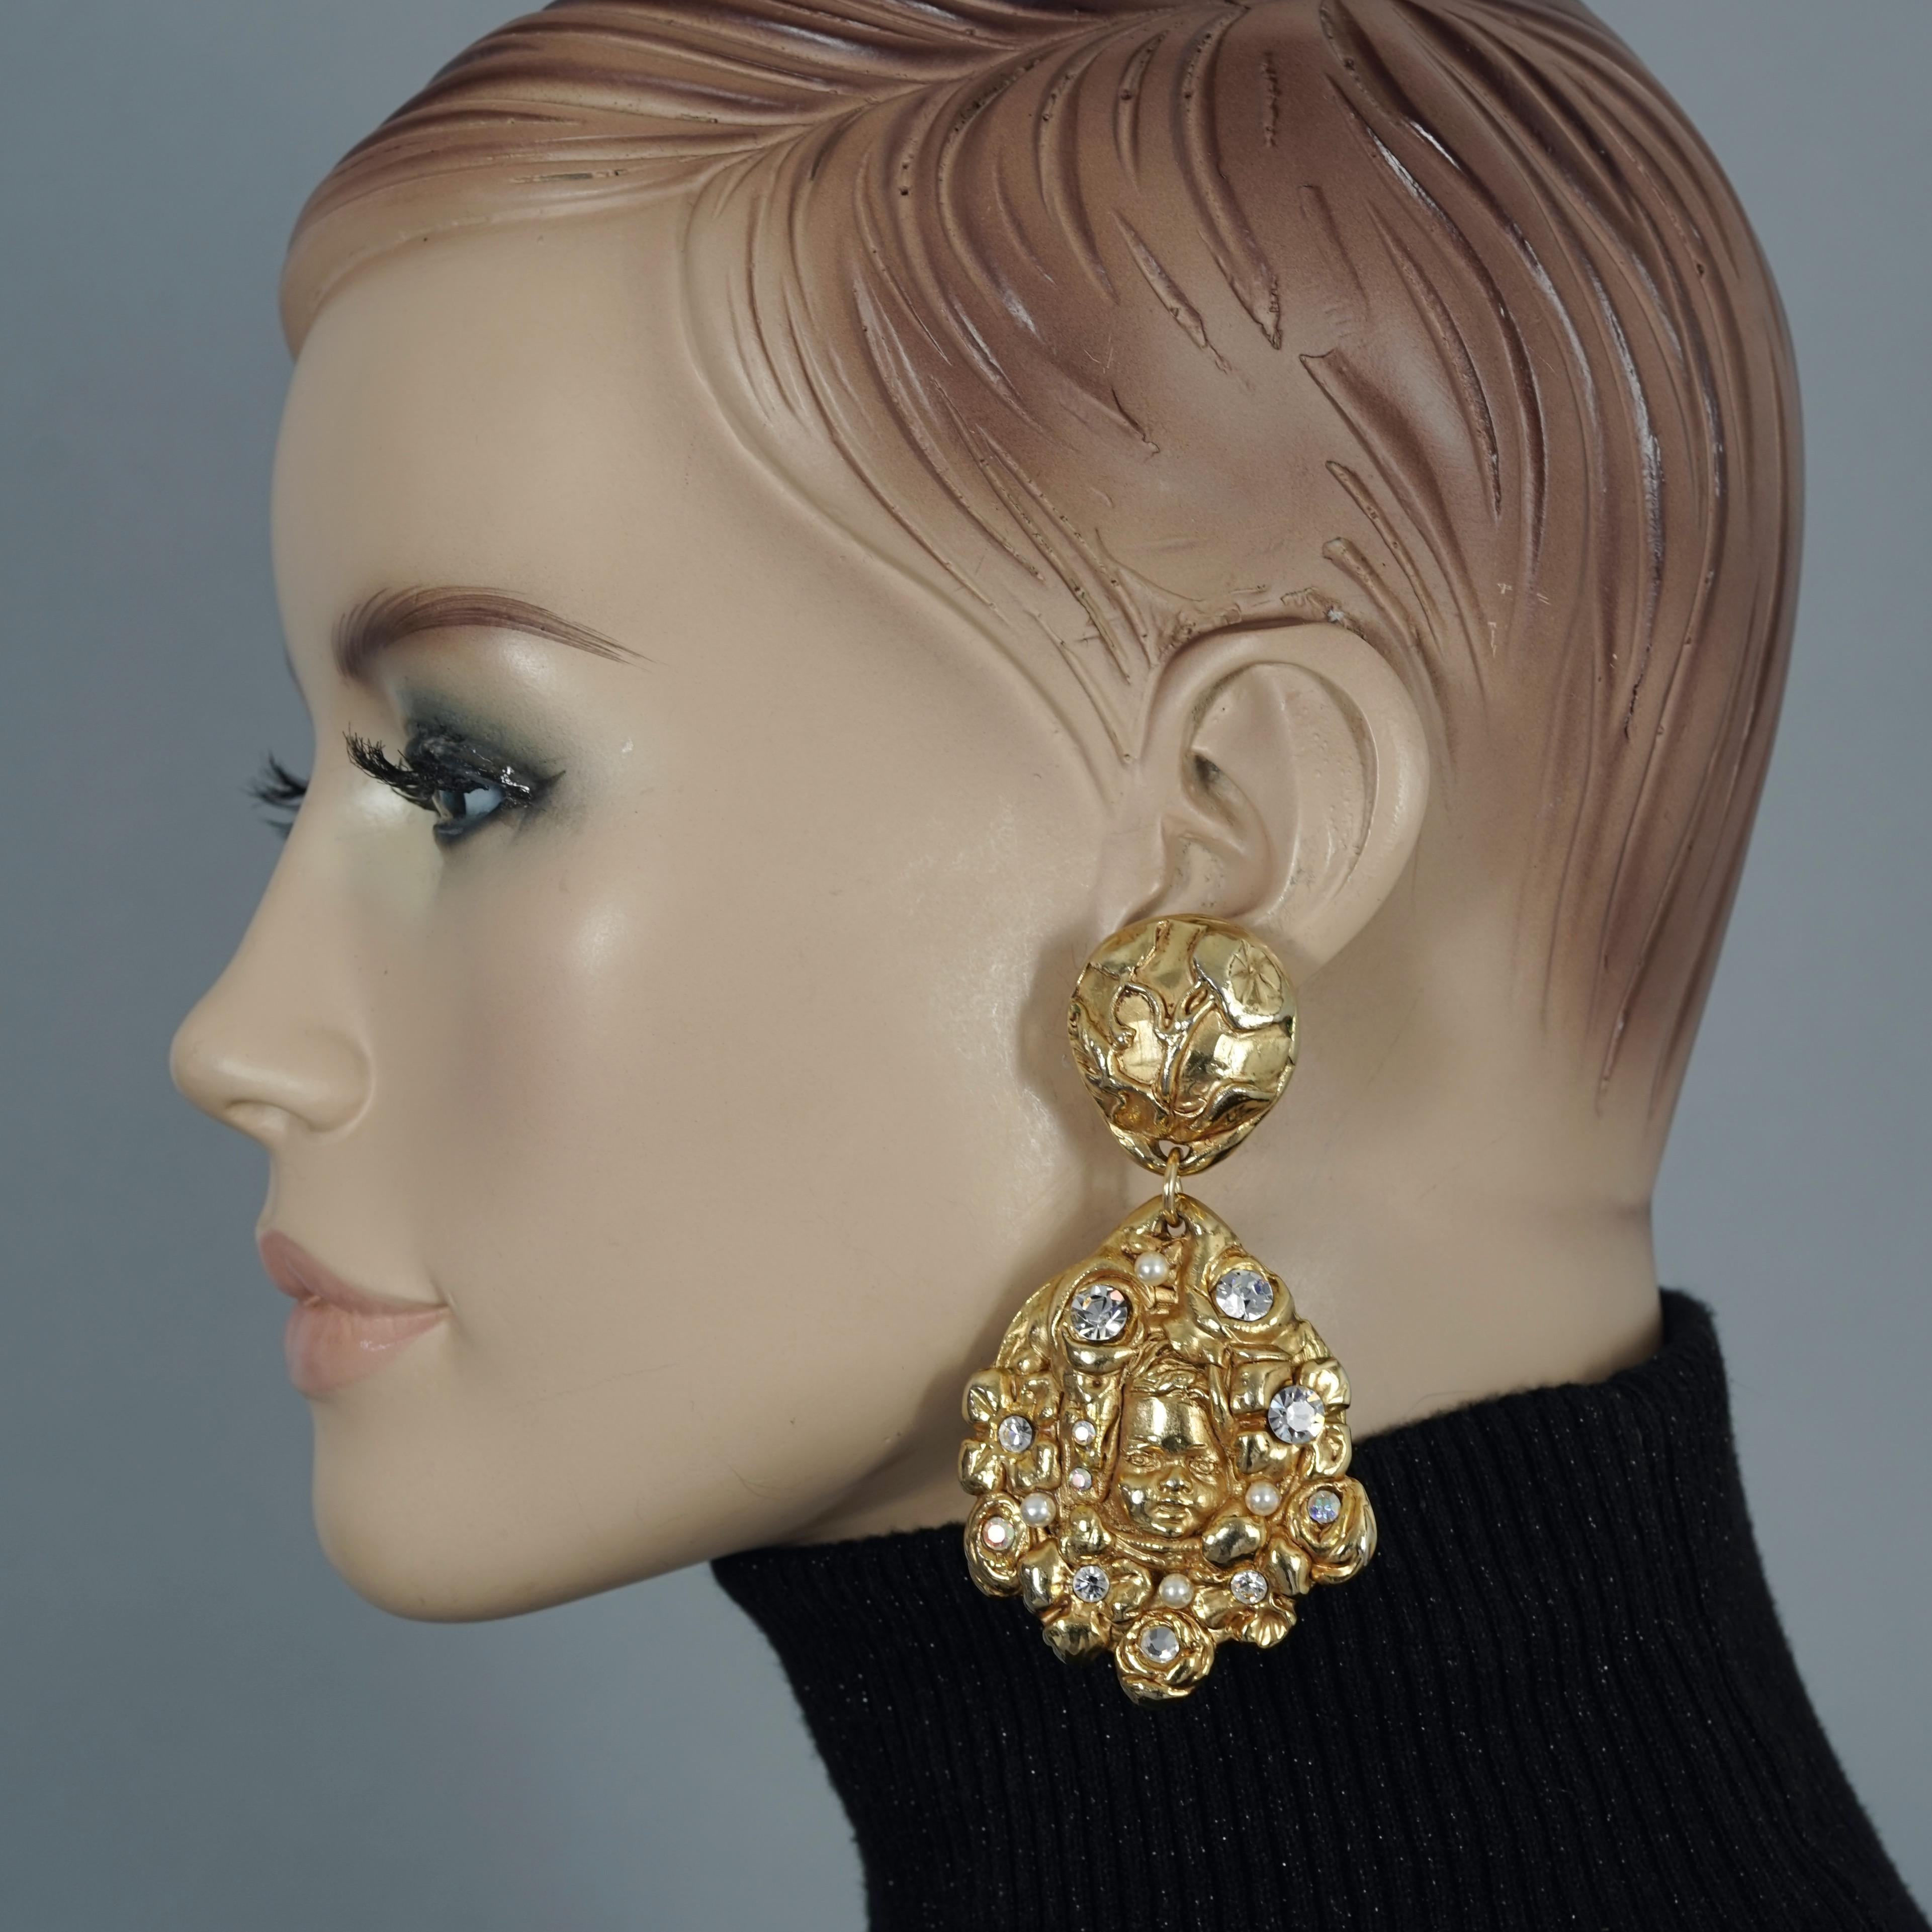 Vintage Massive LA ROSE POURPRE Paris Face Novelty Earrings

Measurements:
Height: 3.54 inches (9 cm)
Width: 1.85 inches (4.7 cm)
Weight per Earring: 28 grams

Features:
- 100% Authentic LA ROSE POURPRE Paris.
- Massive 3 dimensional face